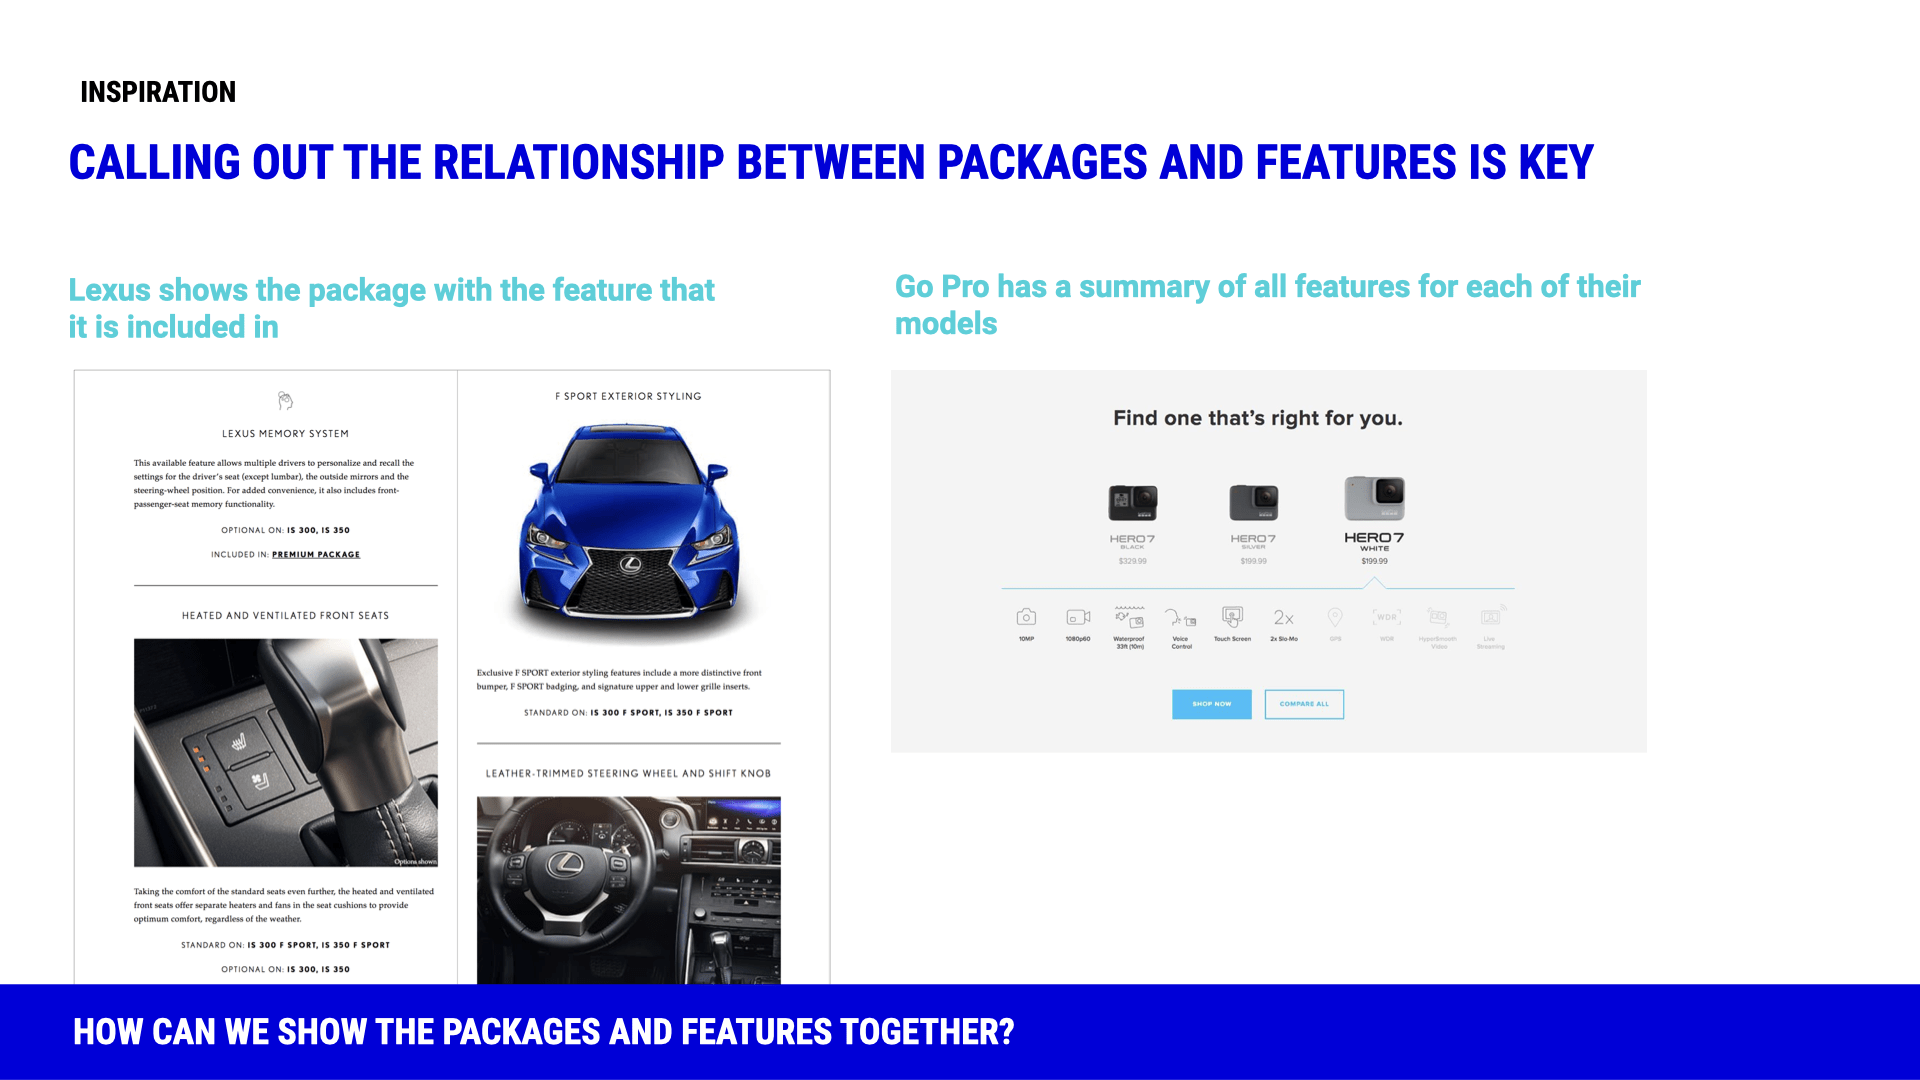 Competitor package differentiation